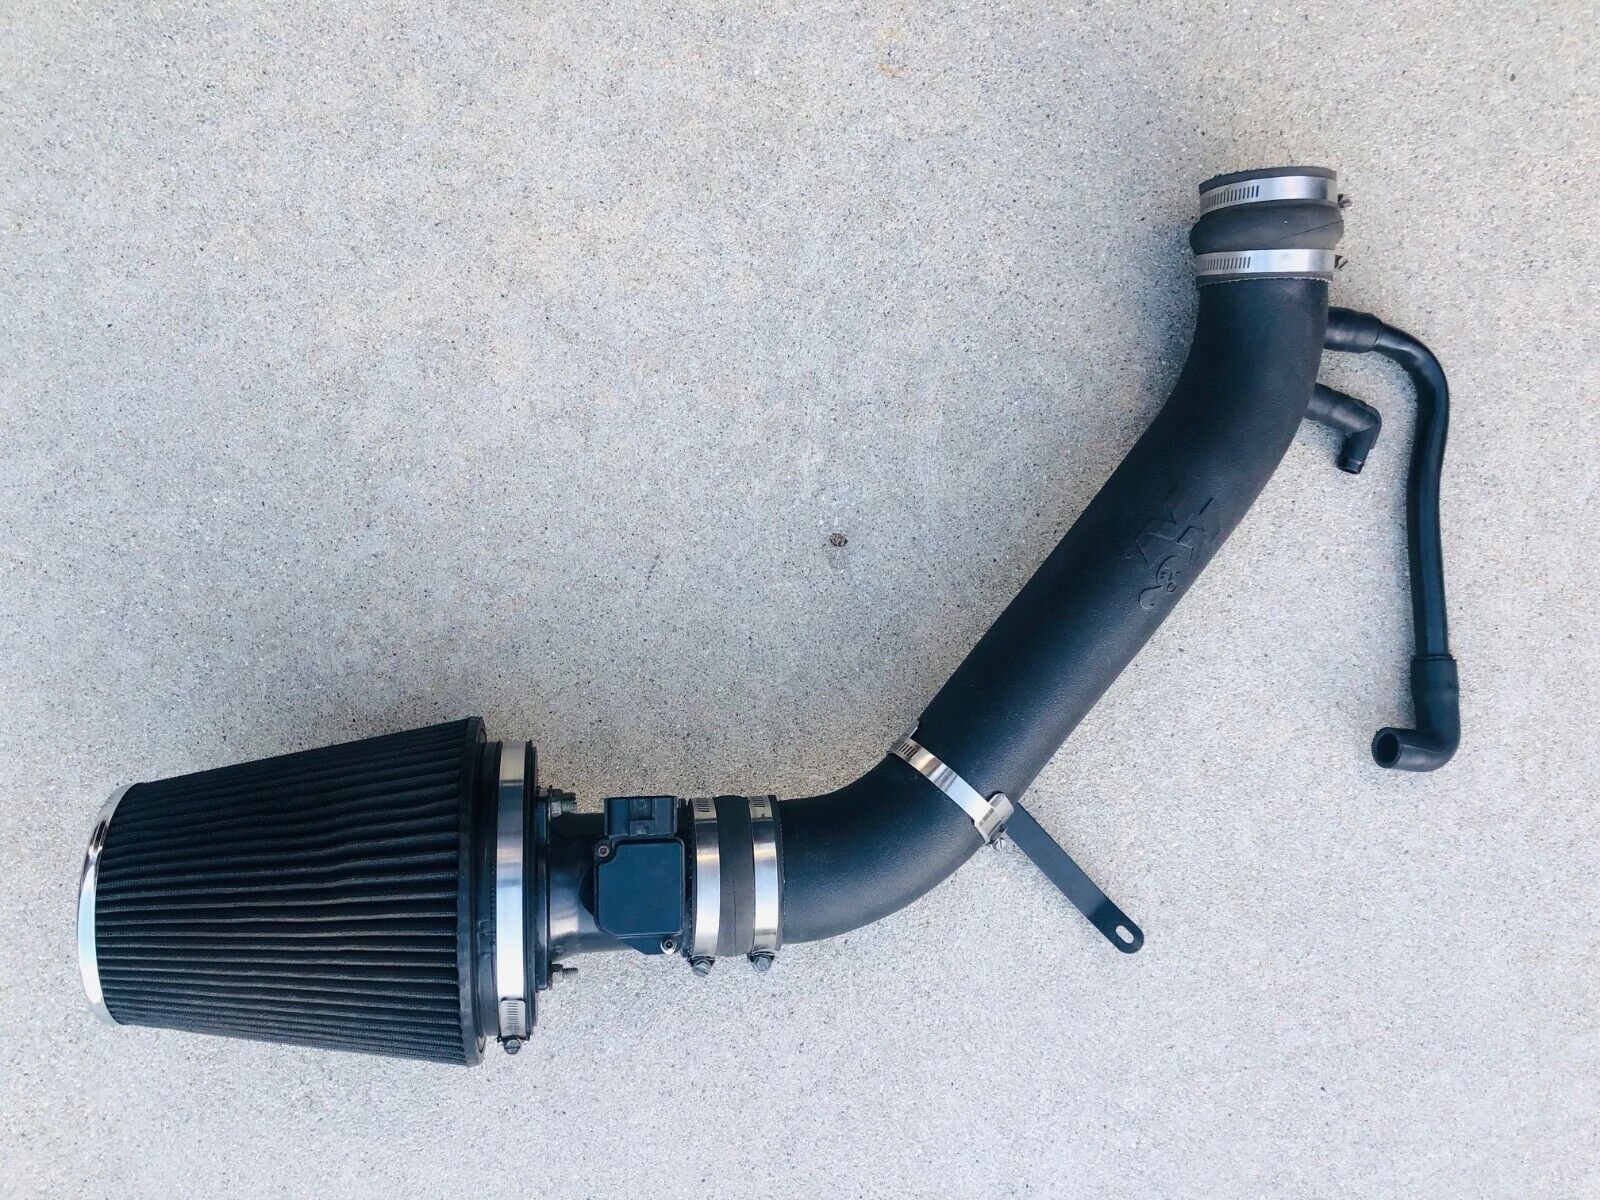 K&N RAM COLD AIR INTAKE  57 SERIES SYSTEM FOR Ford Crown Victoria 4.6L 1999-2002